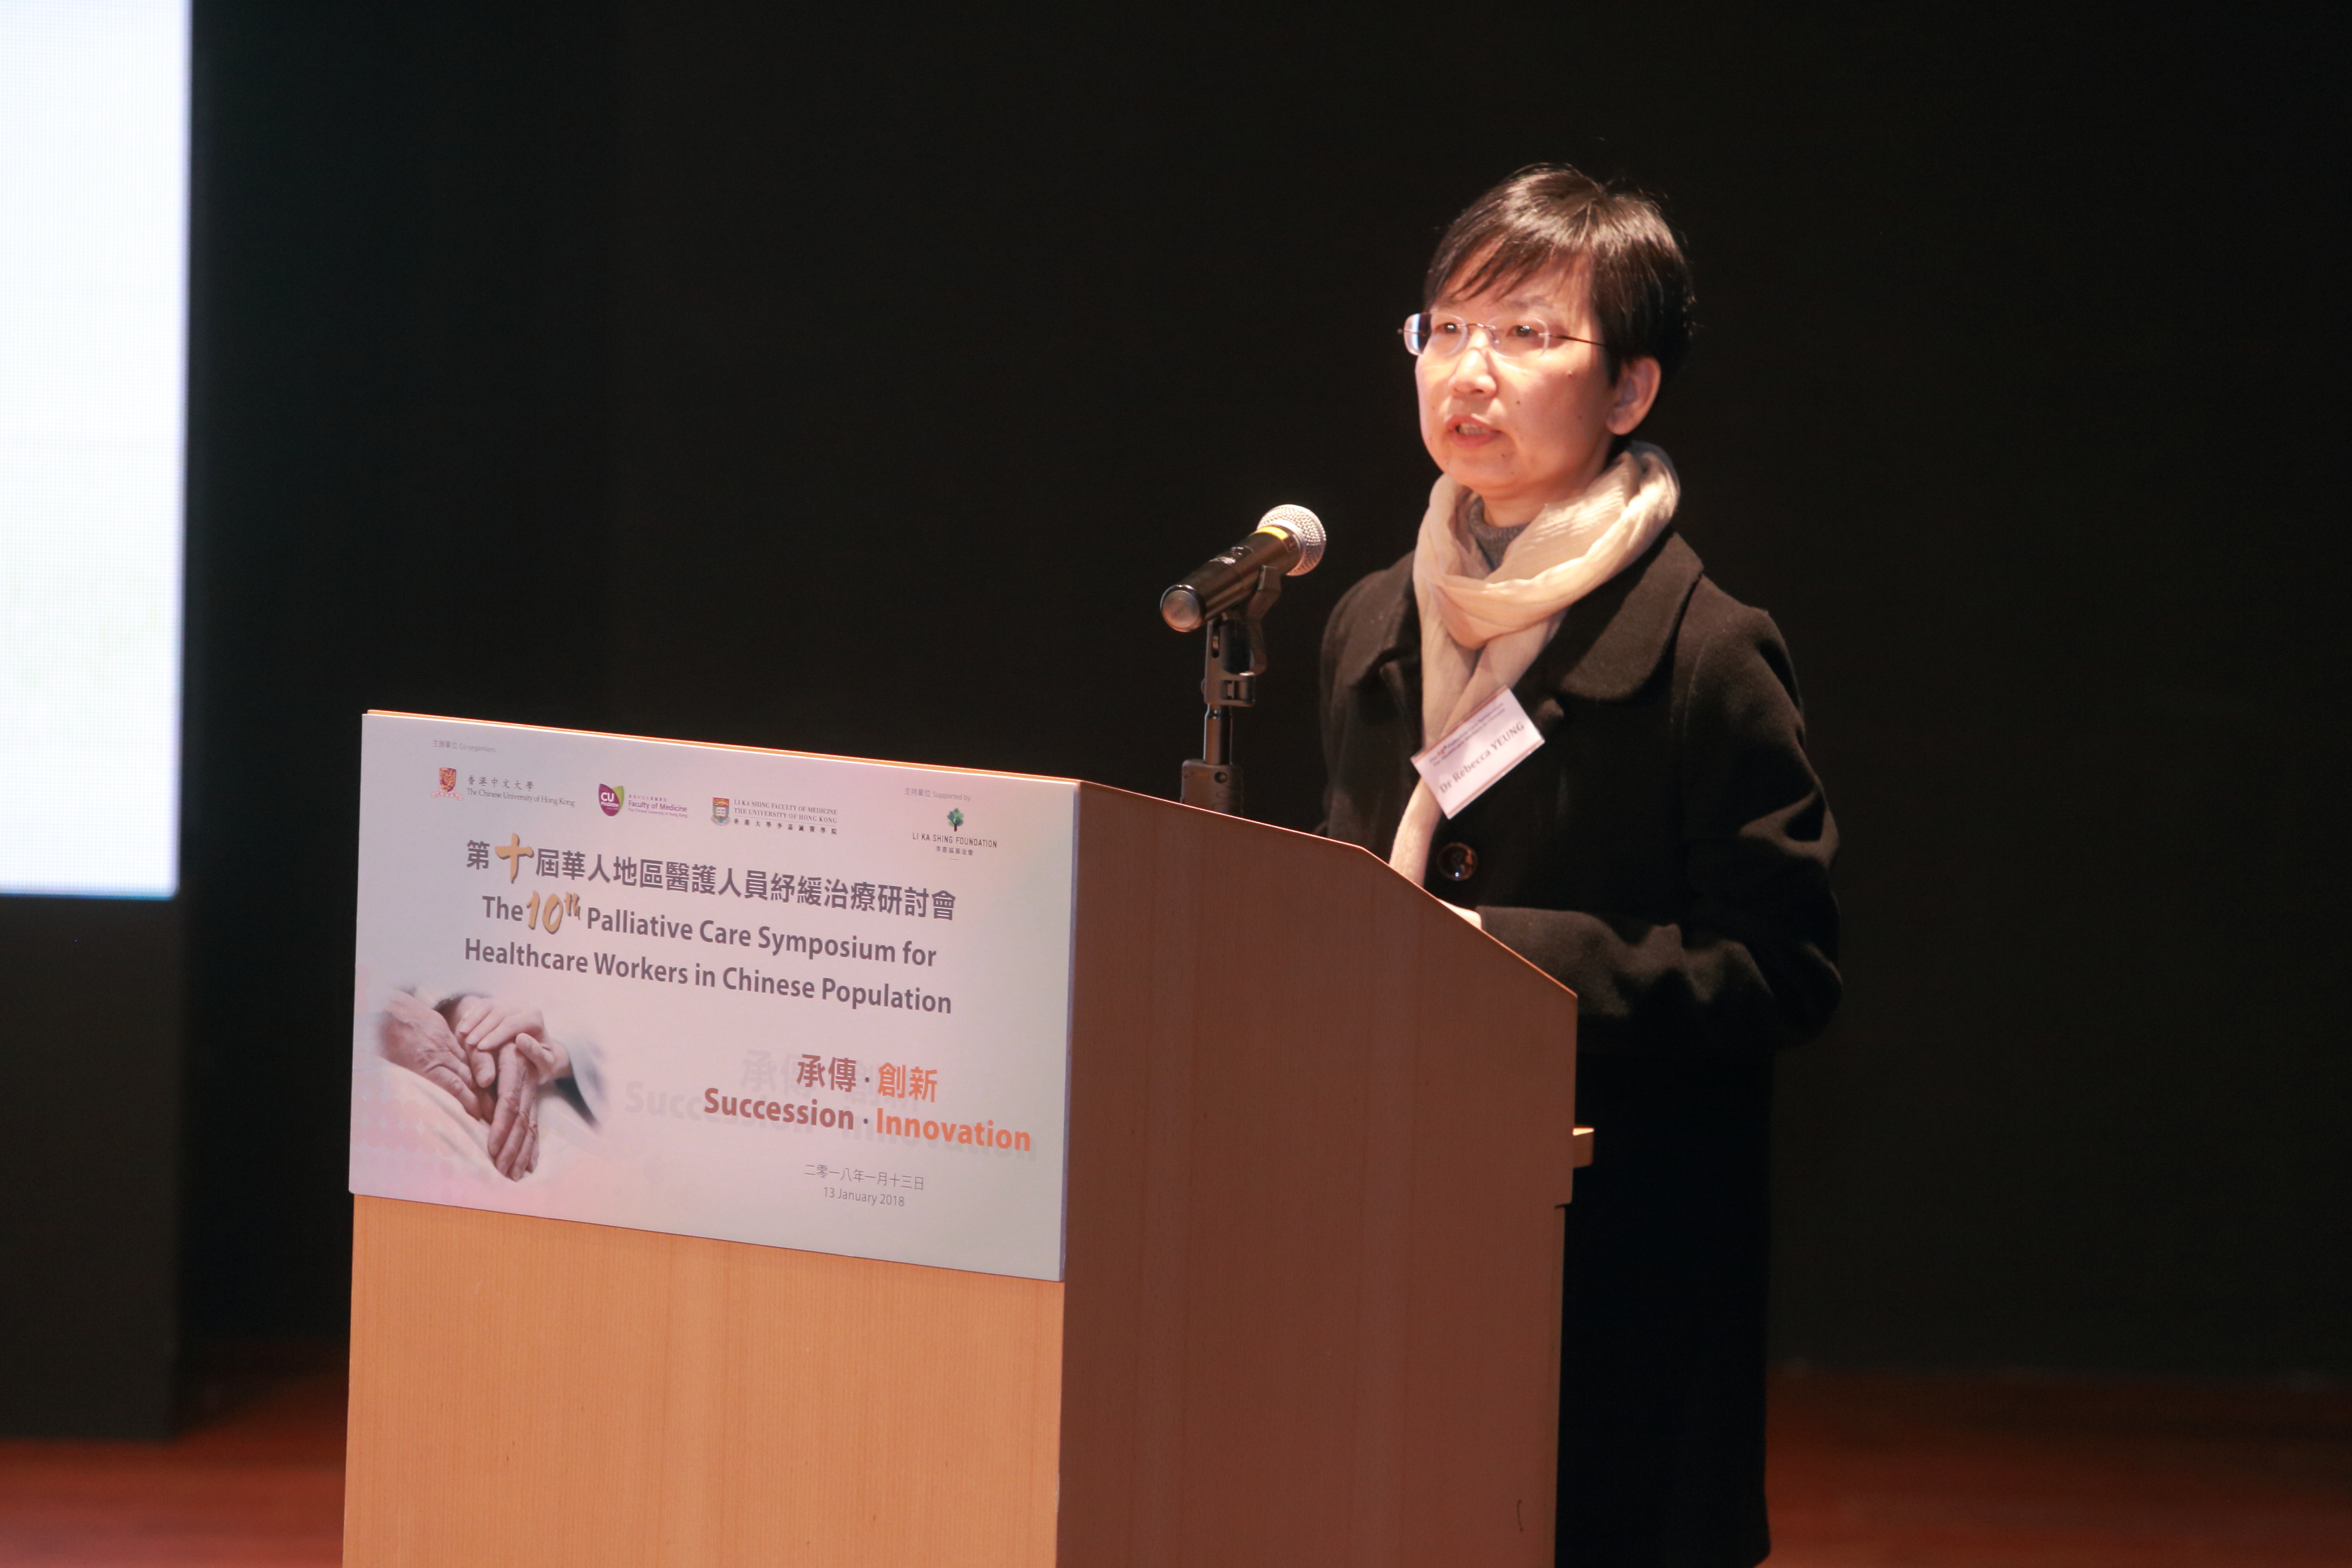 Dr. Rebecca YEUNG, Chief of Service of the Department of Clinical Oncology at the Pamela Youde Nethersole Eastern Hospital, shares at her plenary lecture on how the integration of palliative care into oncology service could bring benefits to patients.